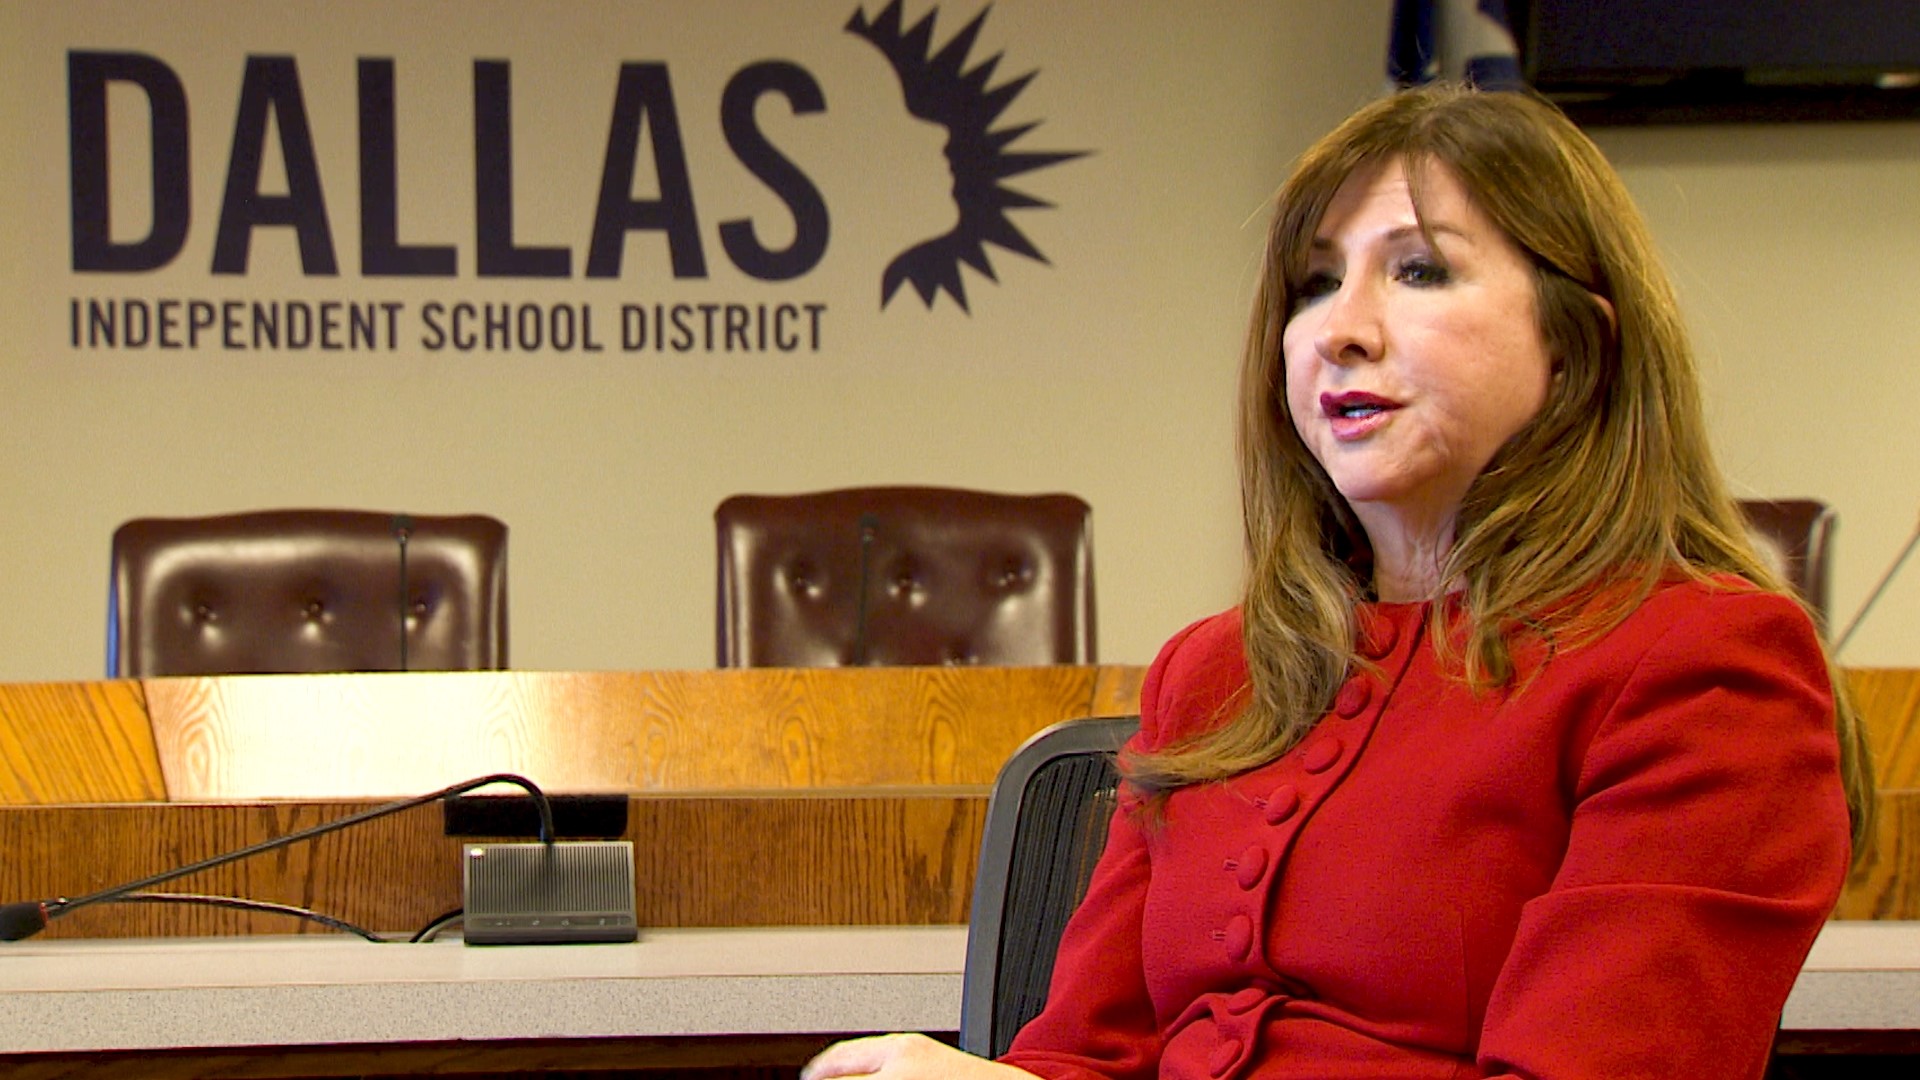 Dallas ISD superintendent Stephanie Elizalde sat down with WFAA to talk about the district's budget, staffing and declining enrollment. Here is the full interview.